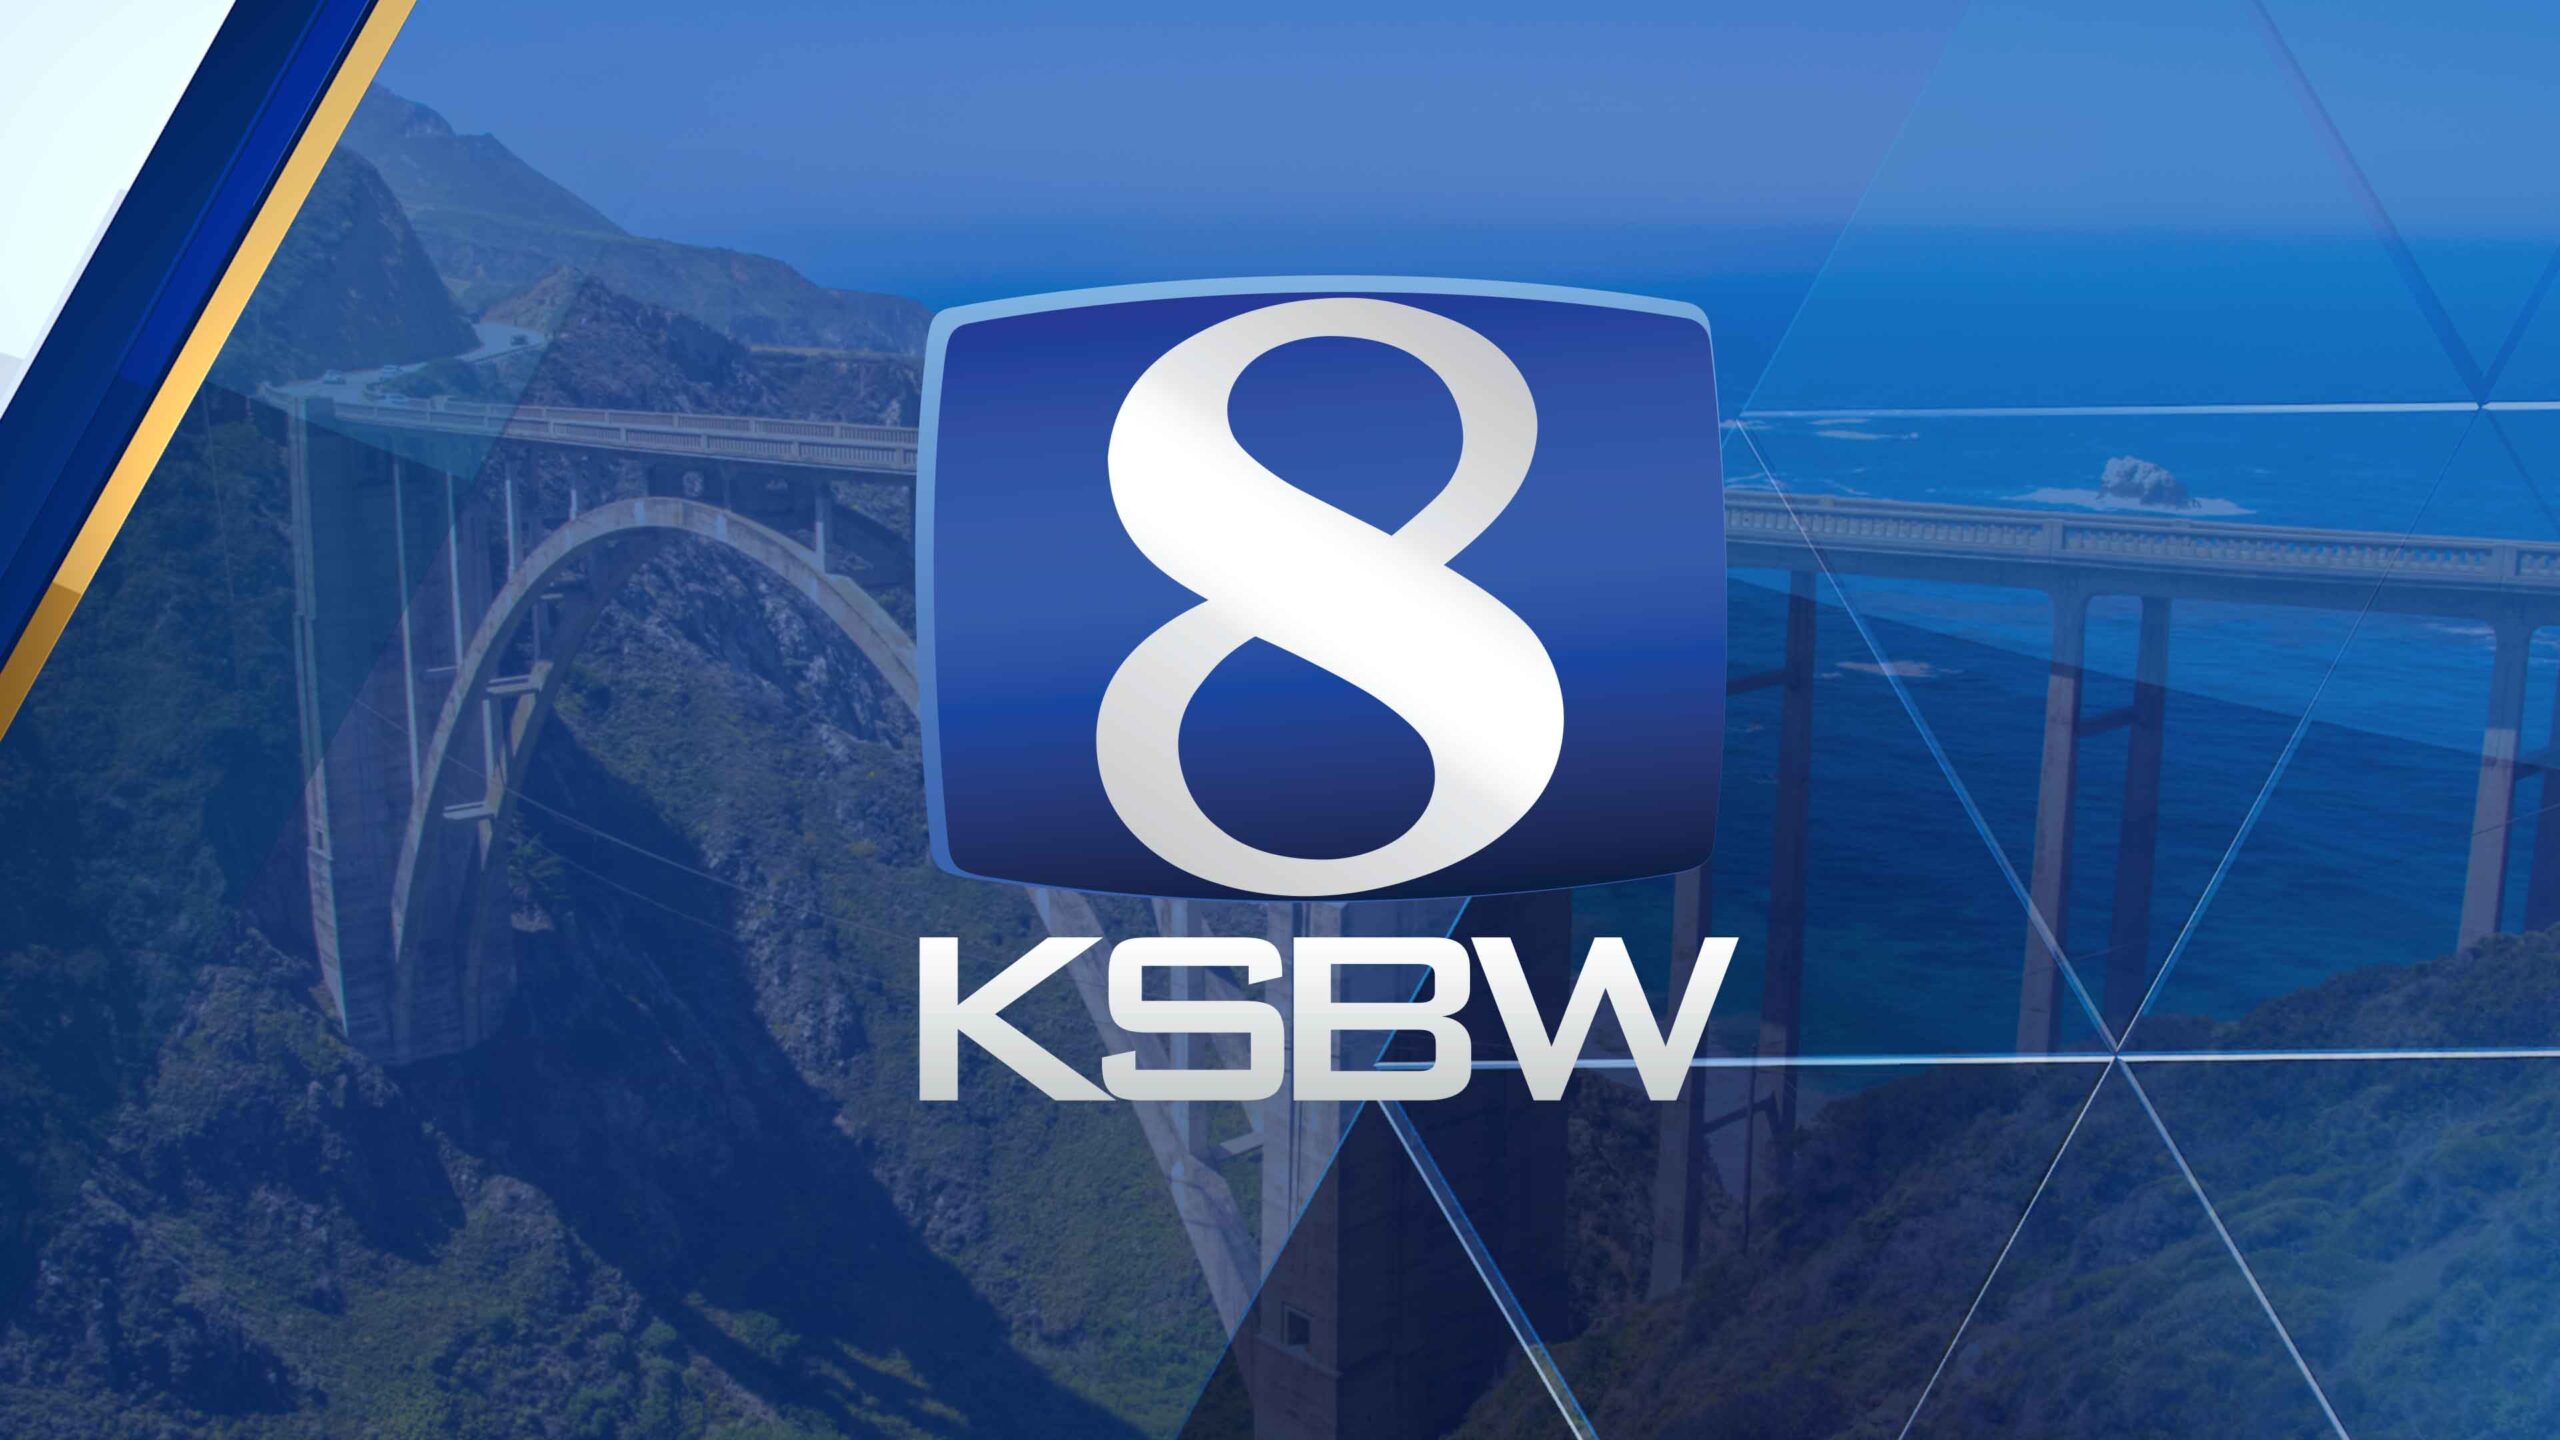 KSBW News and weather streaming free